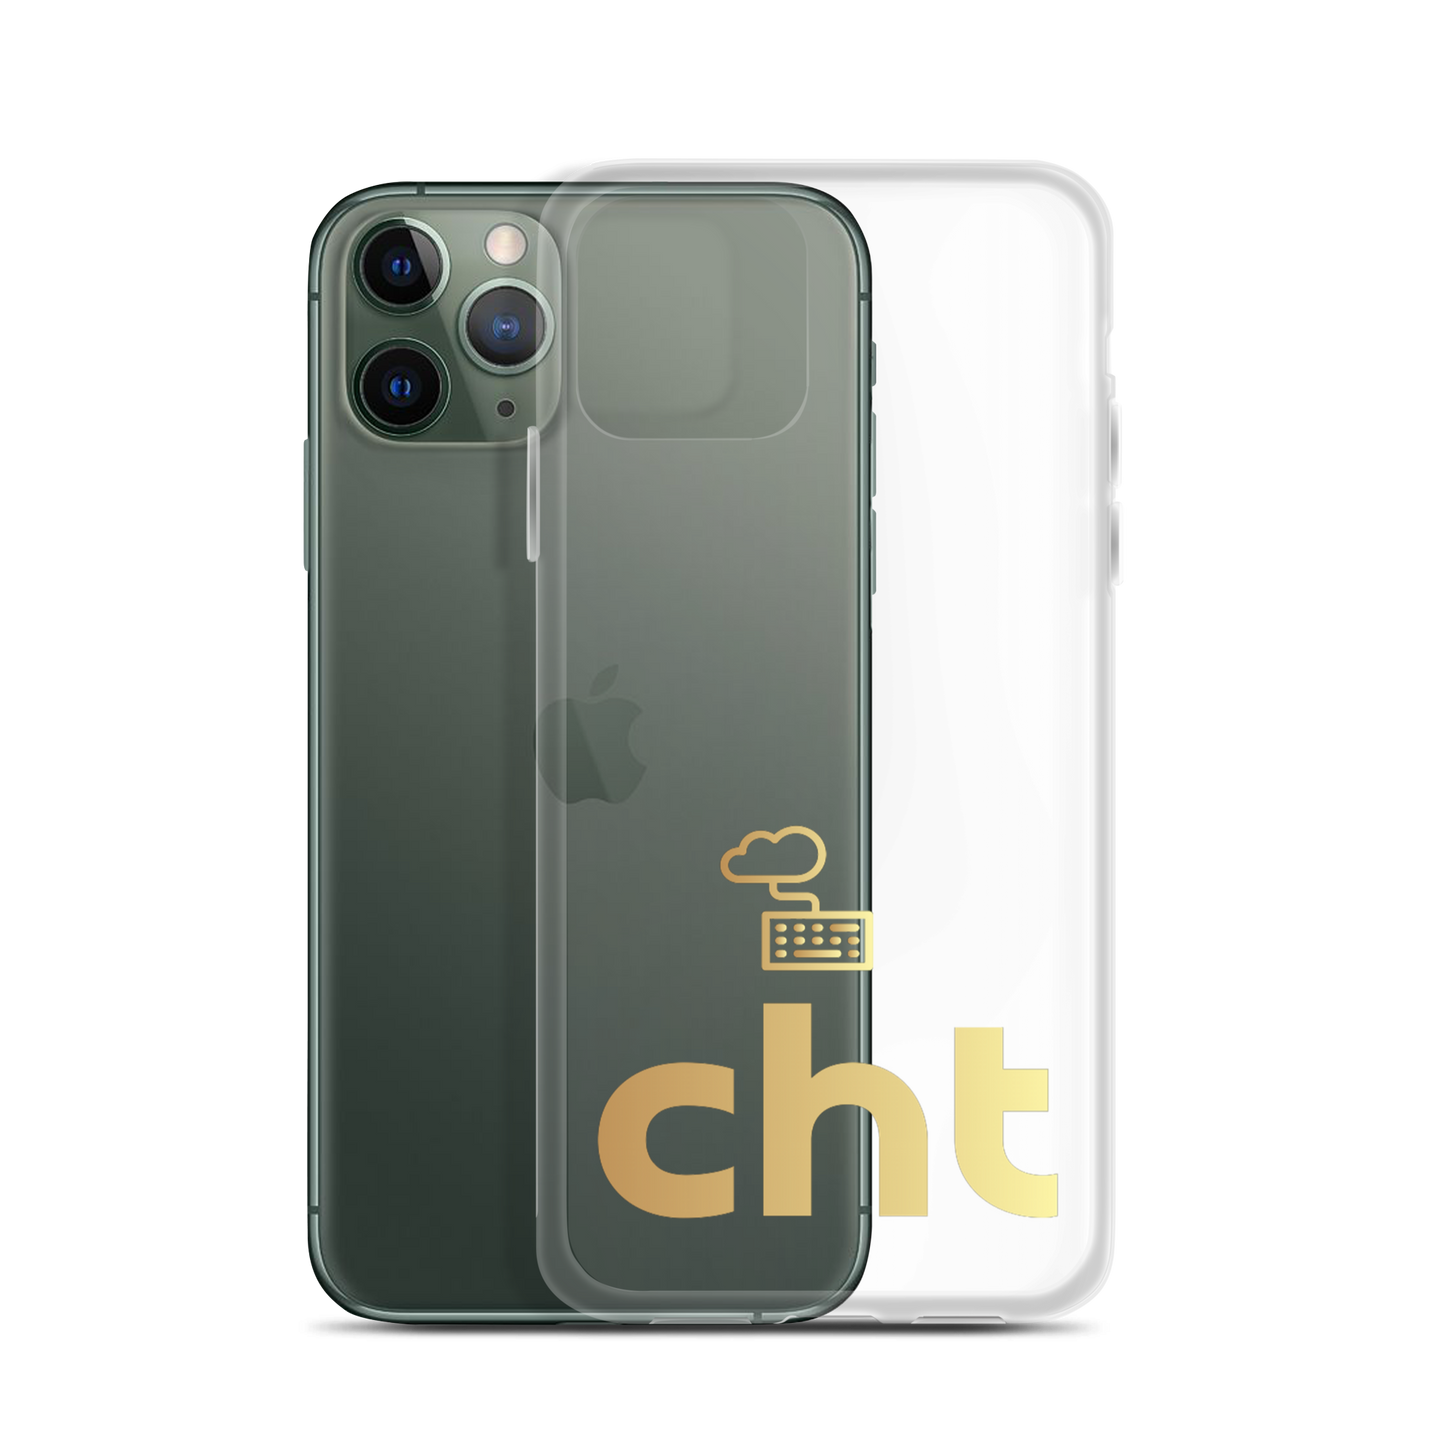 CHT Apparel iPhone Case